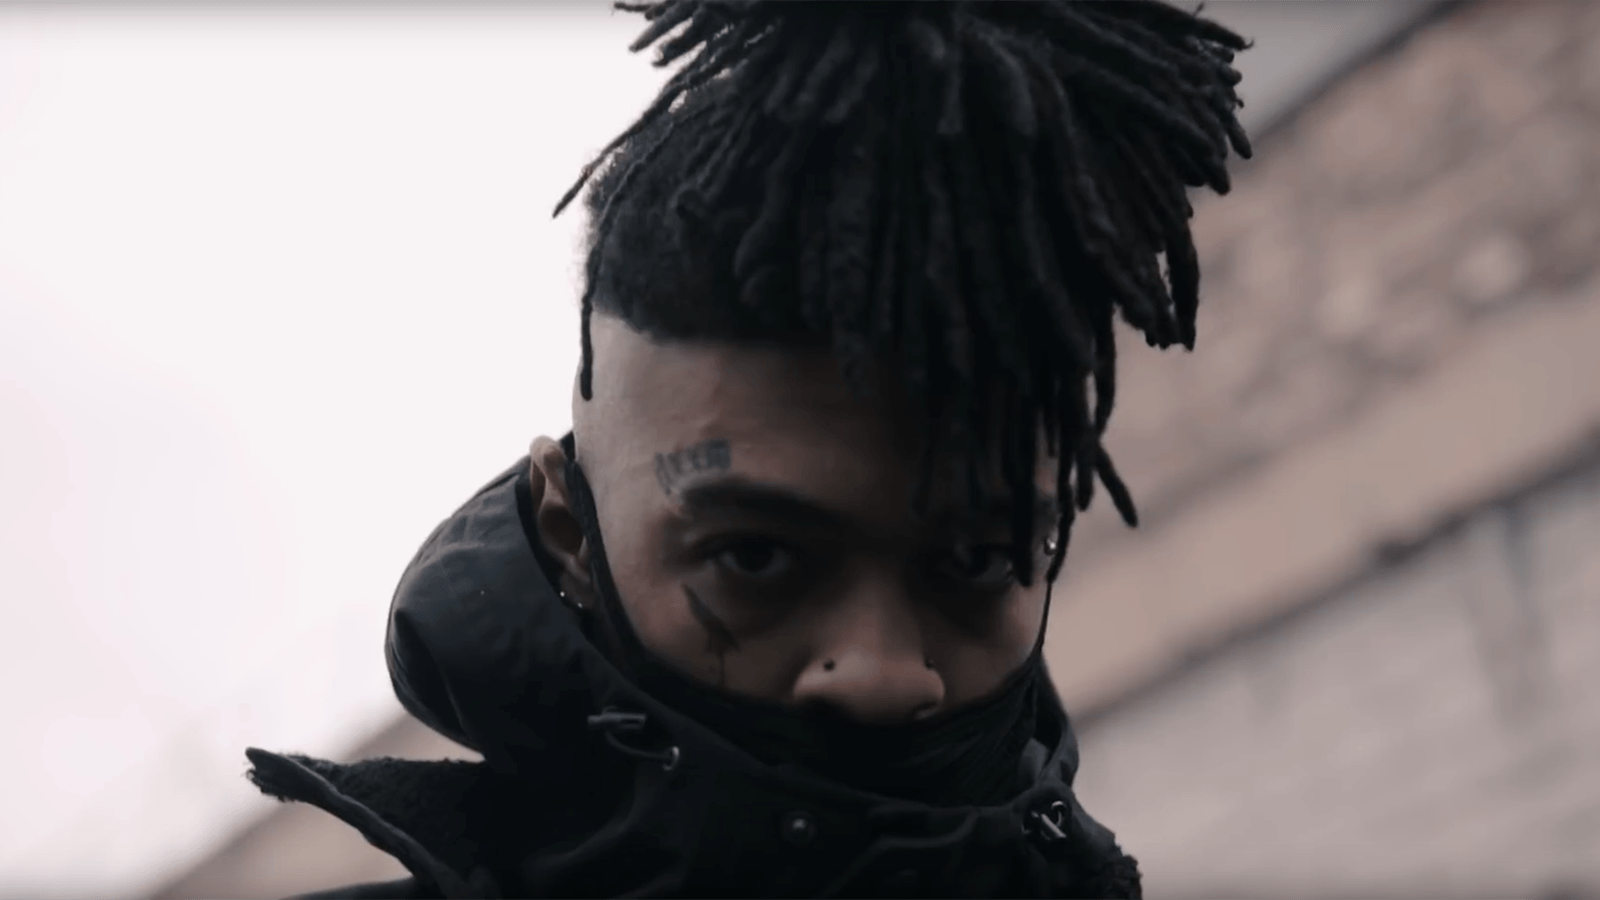 See Trap Metal Artist Scarlxrd Rage In Gritty New